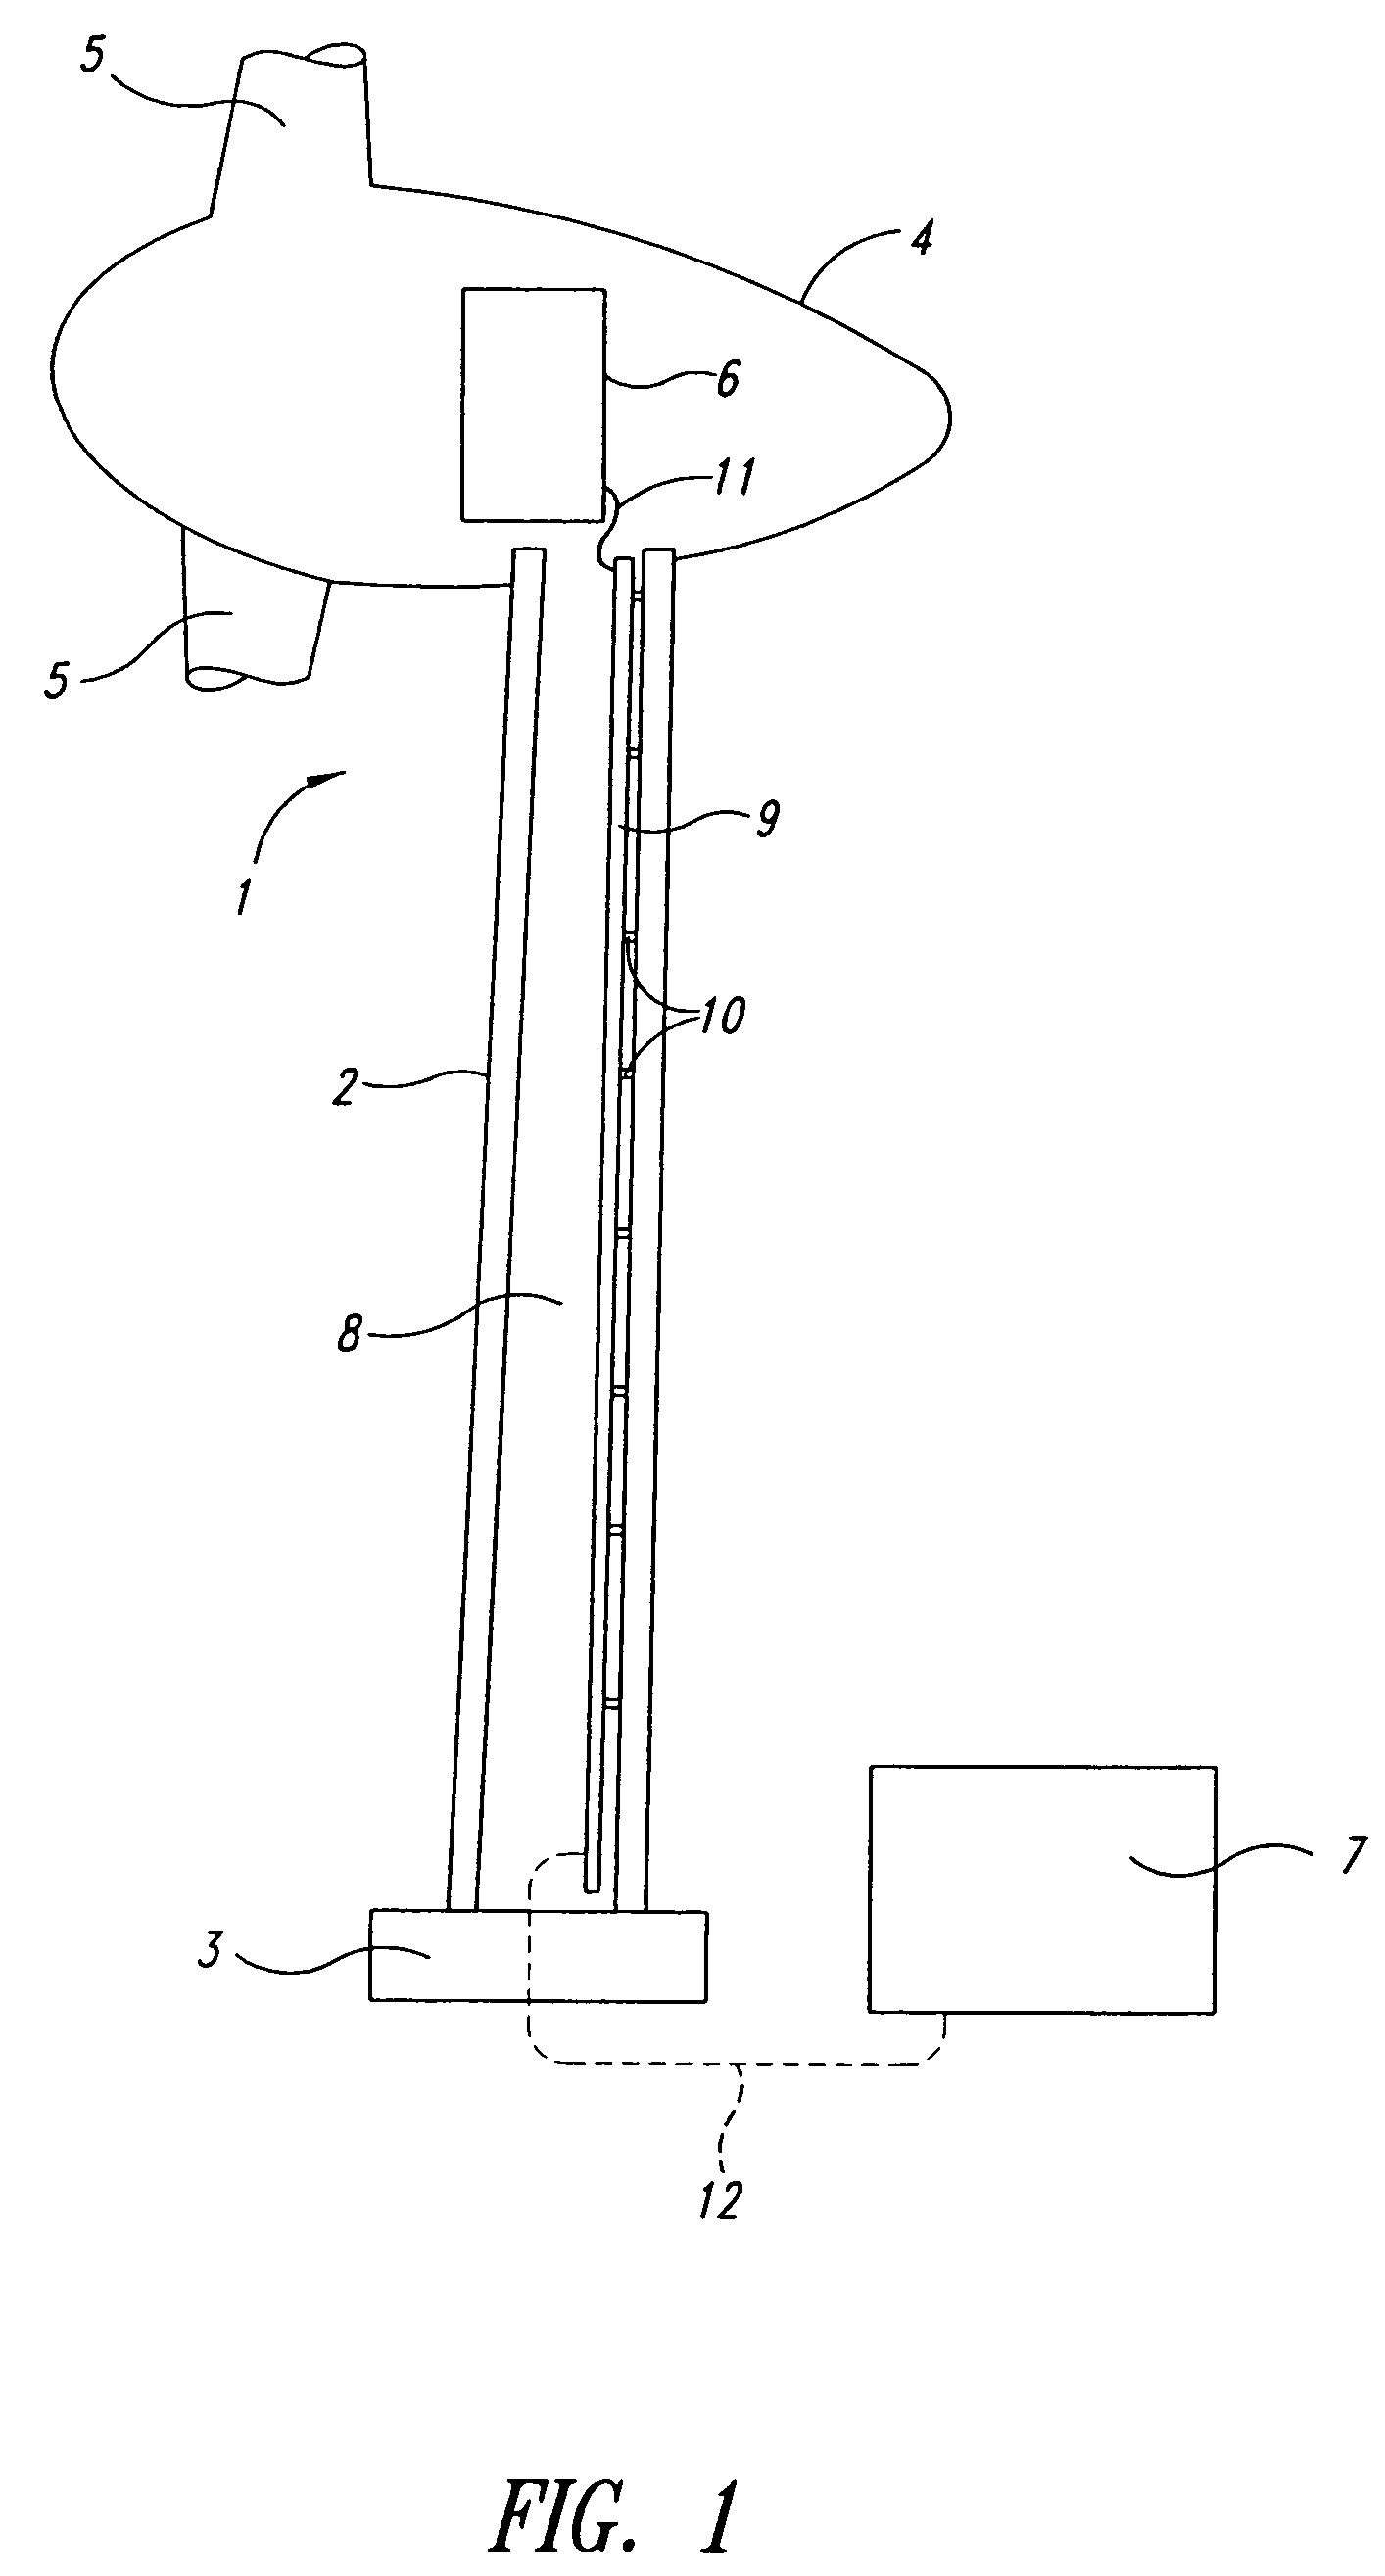 Wind turbine with current conducting means, which are pre-assembled in the tower